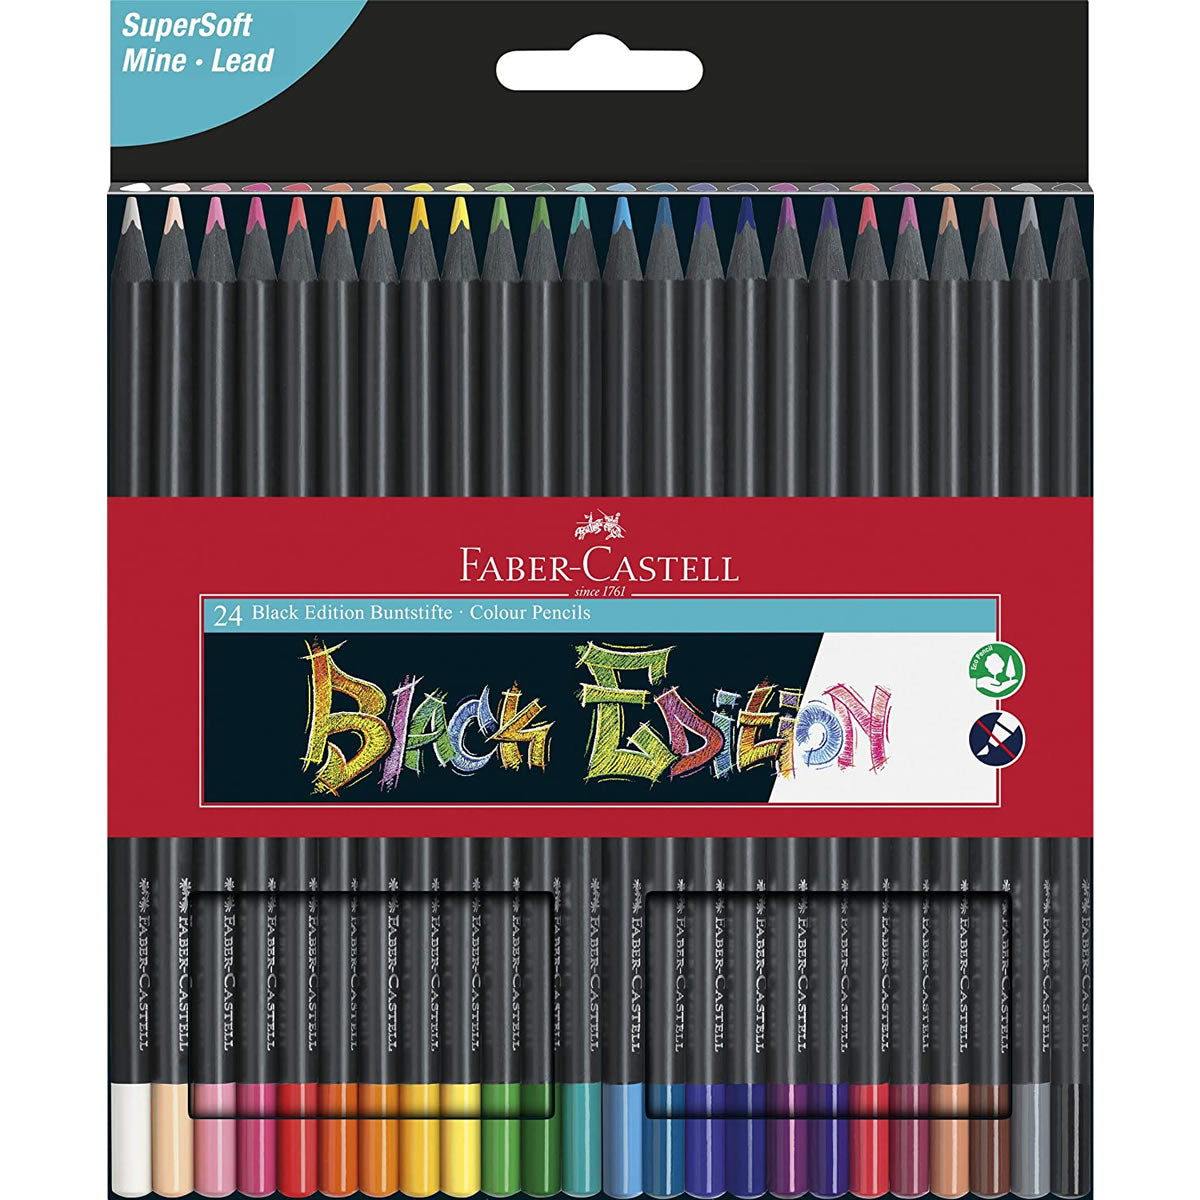 Faber-Castell Black Edition Colouring Pencils - Pack of 24